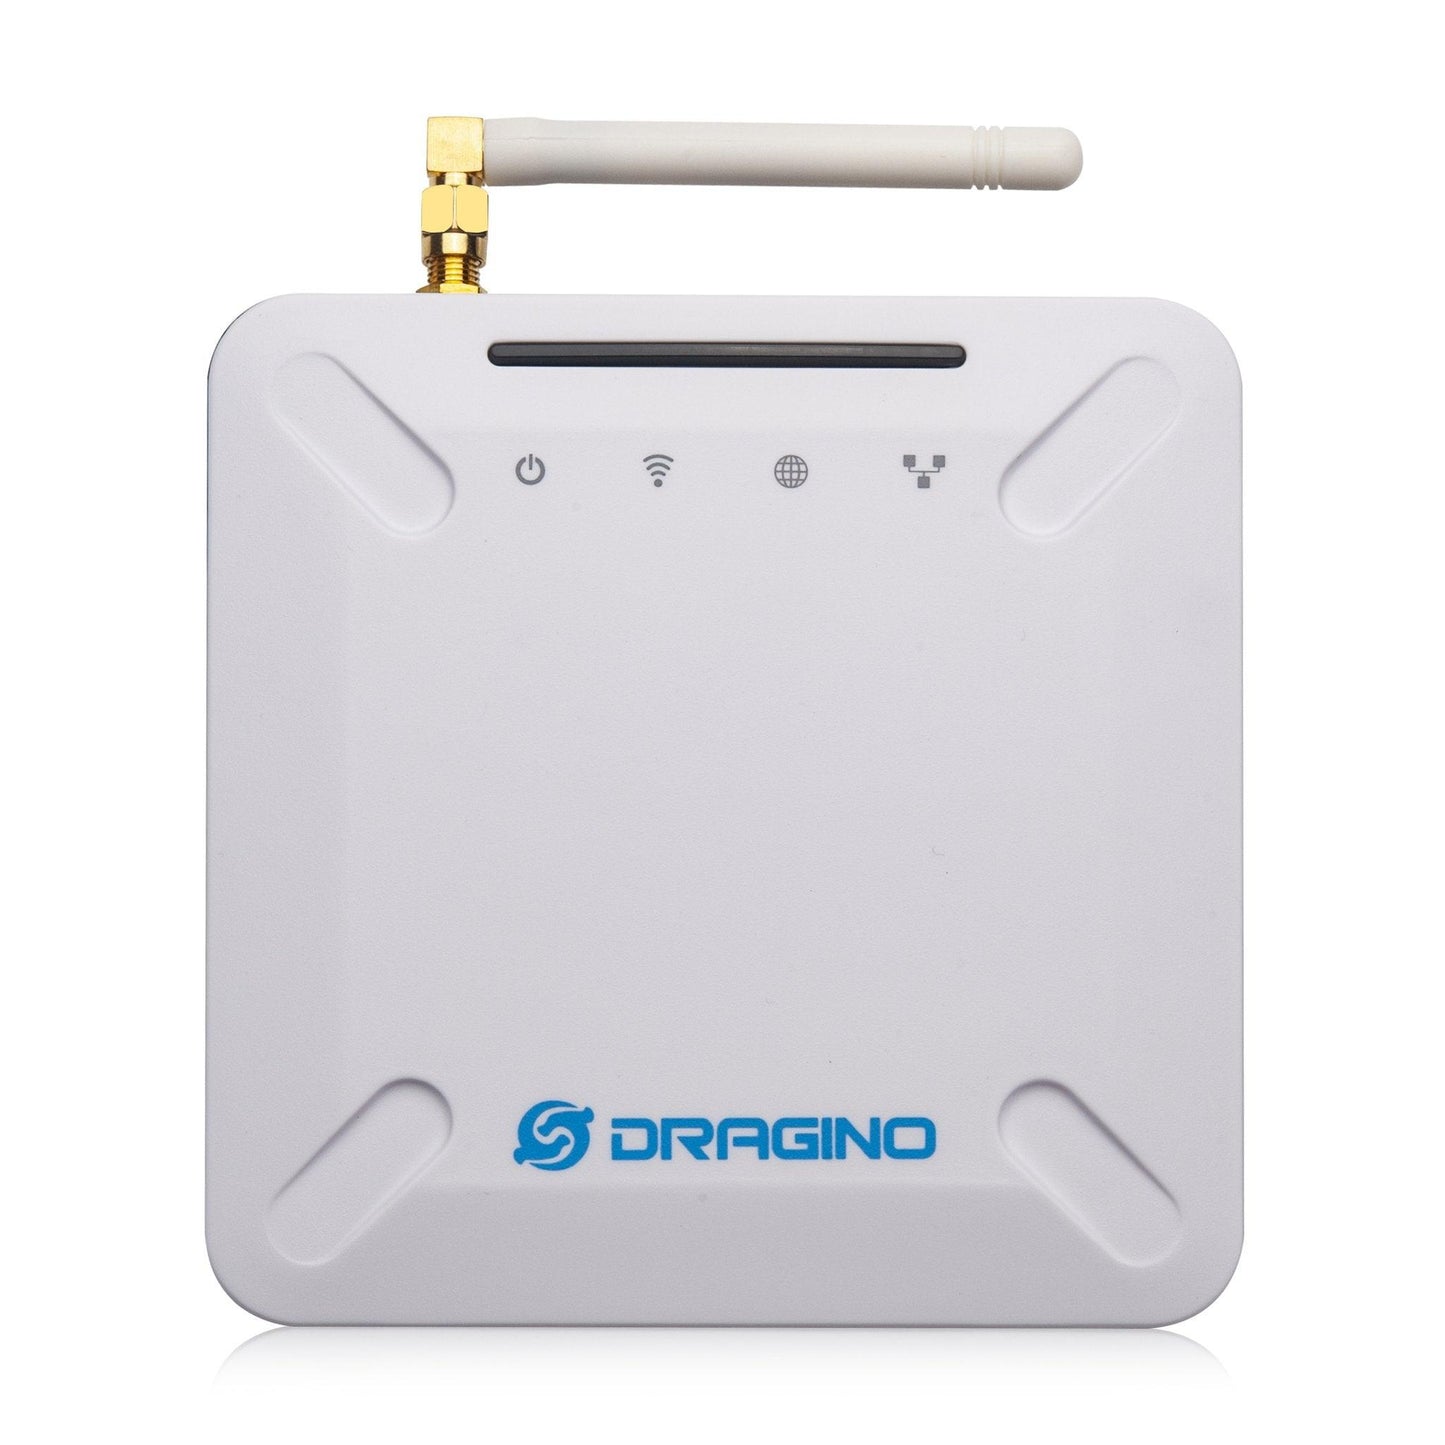 Dragino LPS8 Indoor Gateway - LoRaWAN (Data Only) - Mapping Network